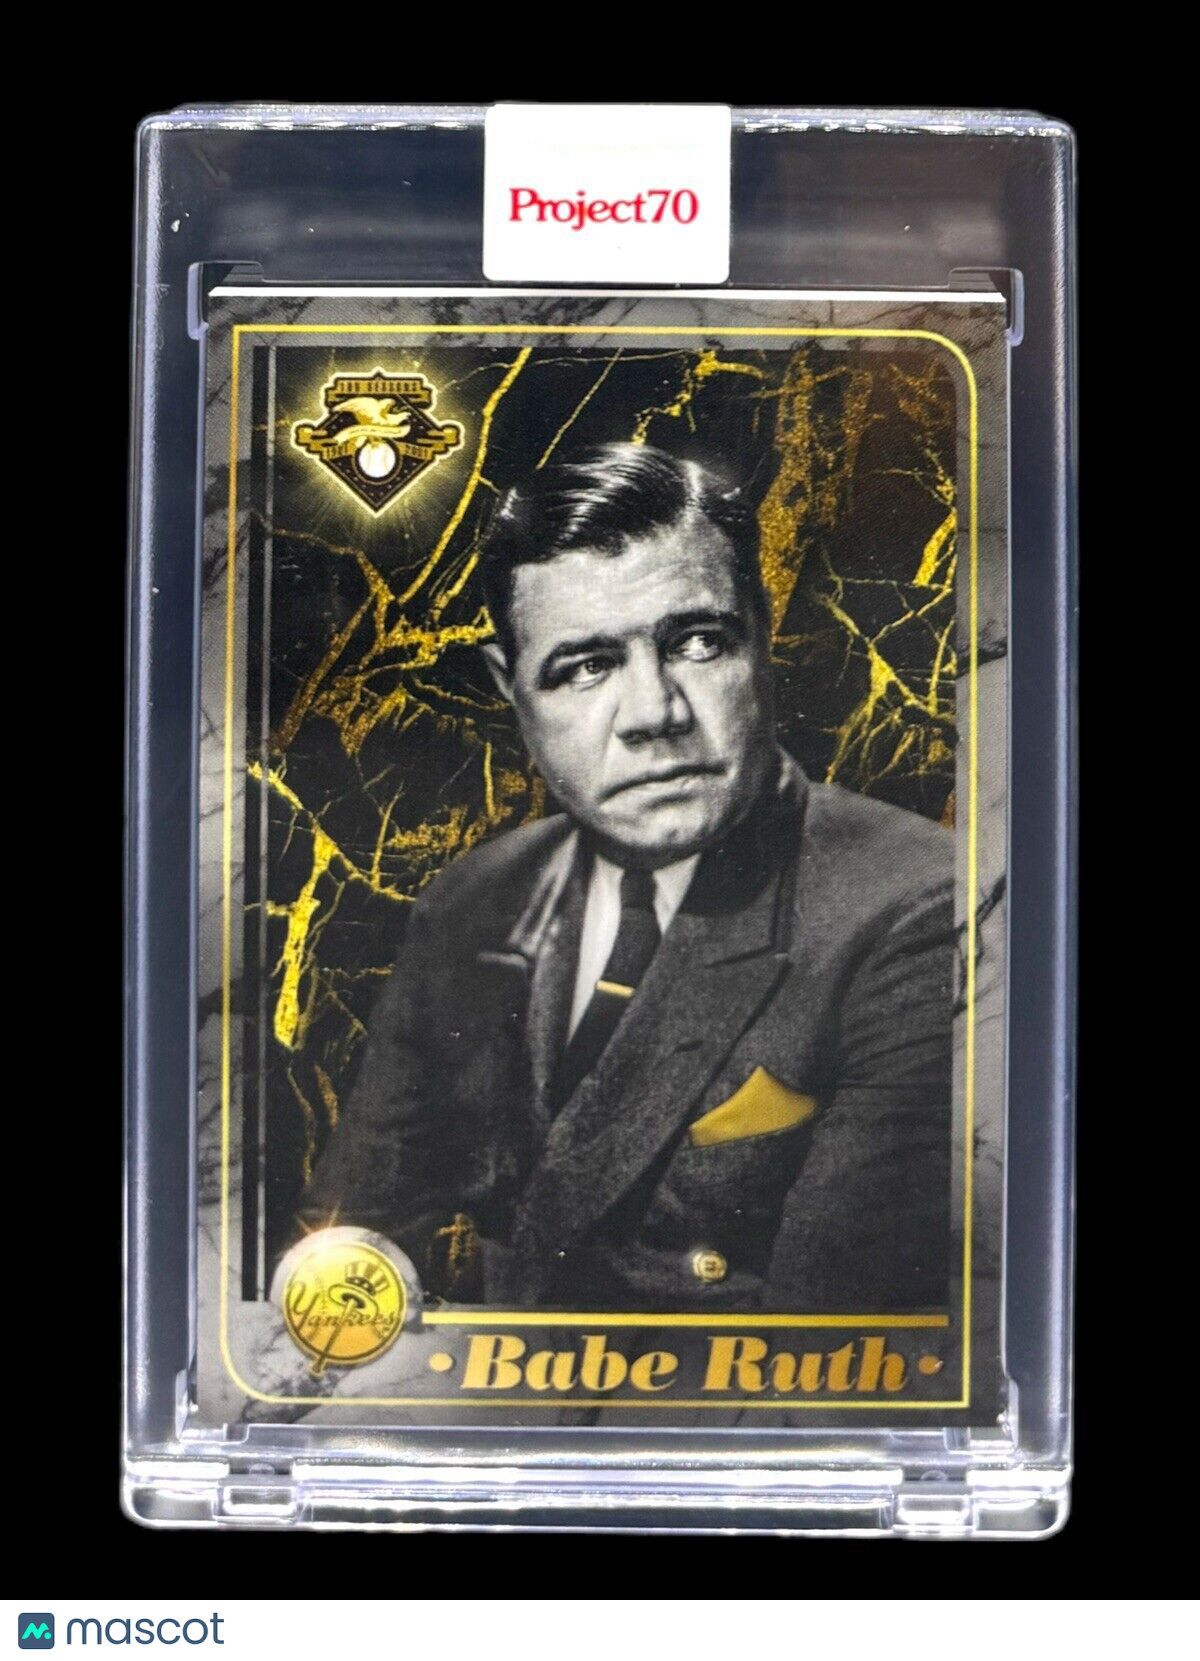 2001 Project70 #551 - Babe Ruth by Mikael B Yankees - Print Run: 1,917